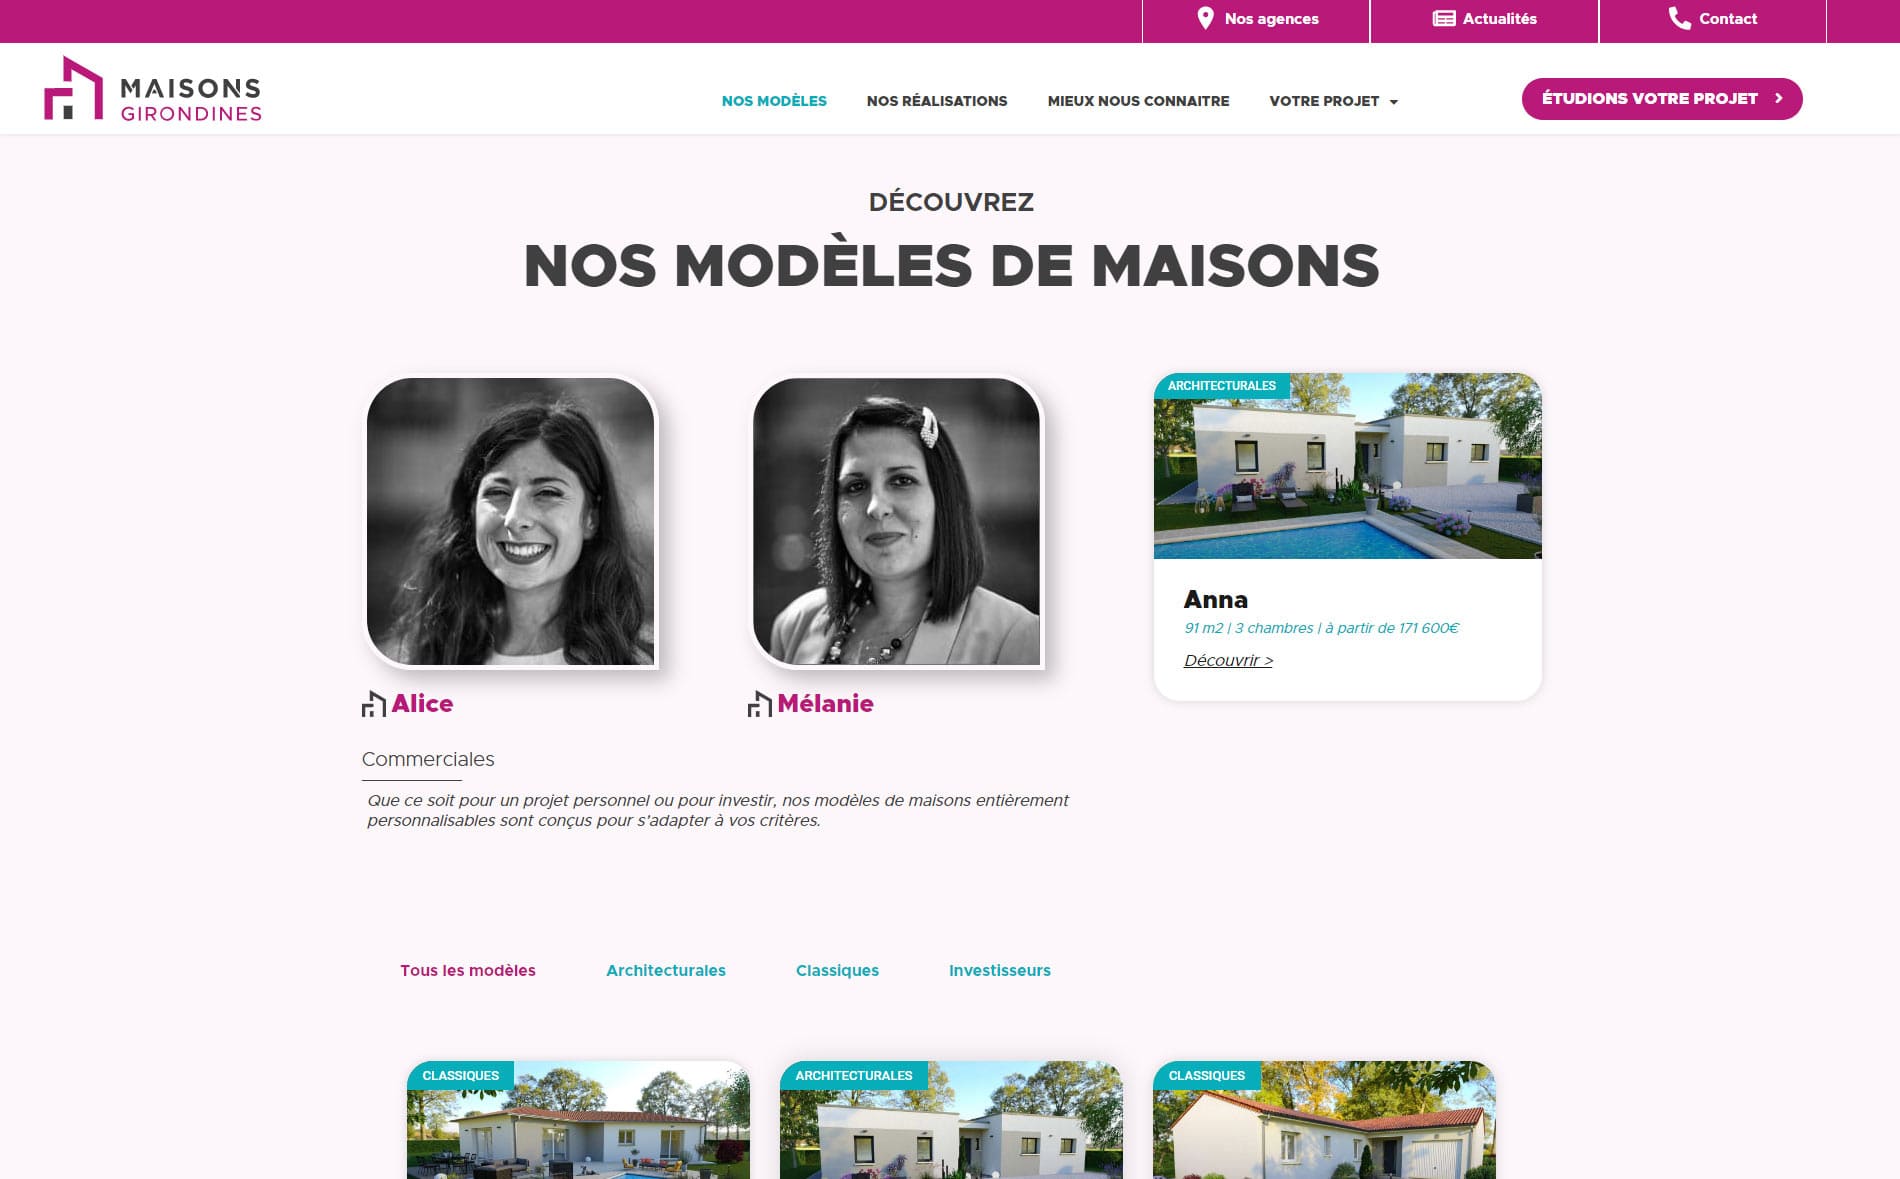 site-page-modeles-maisons-girondines